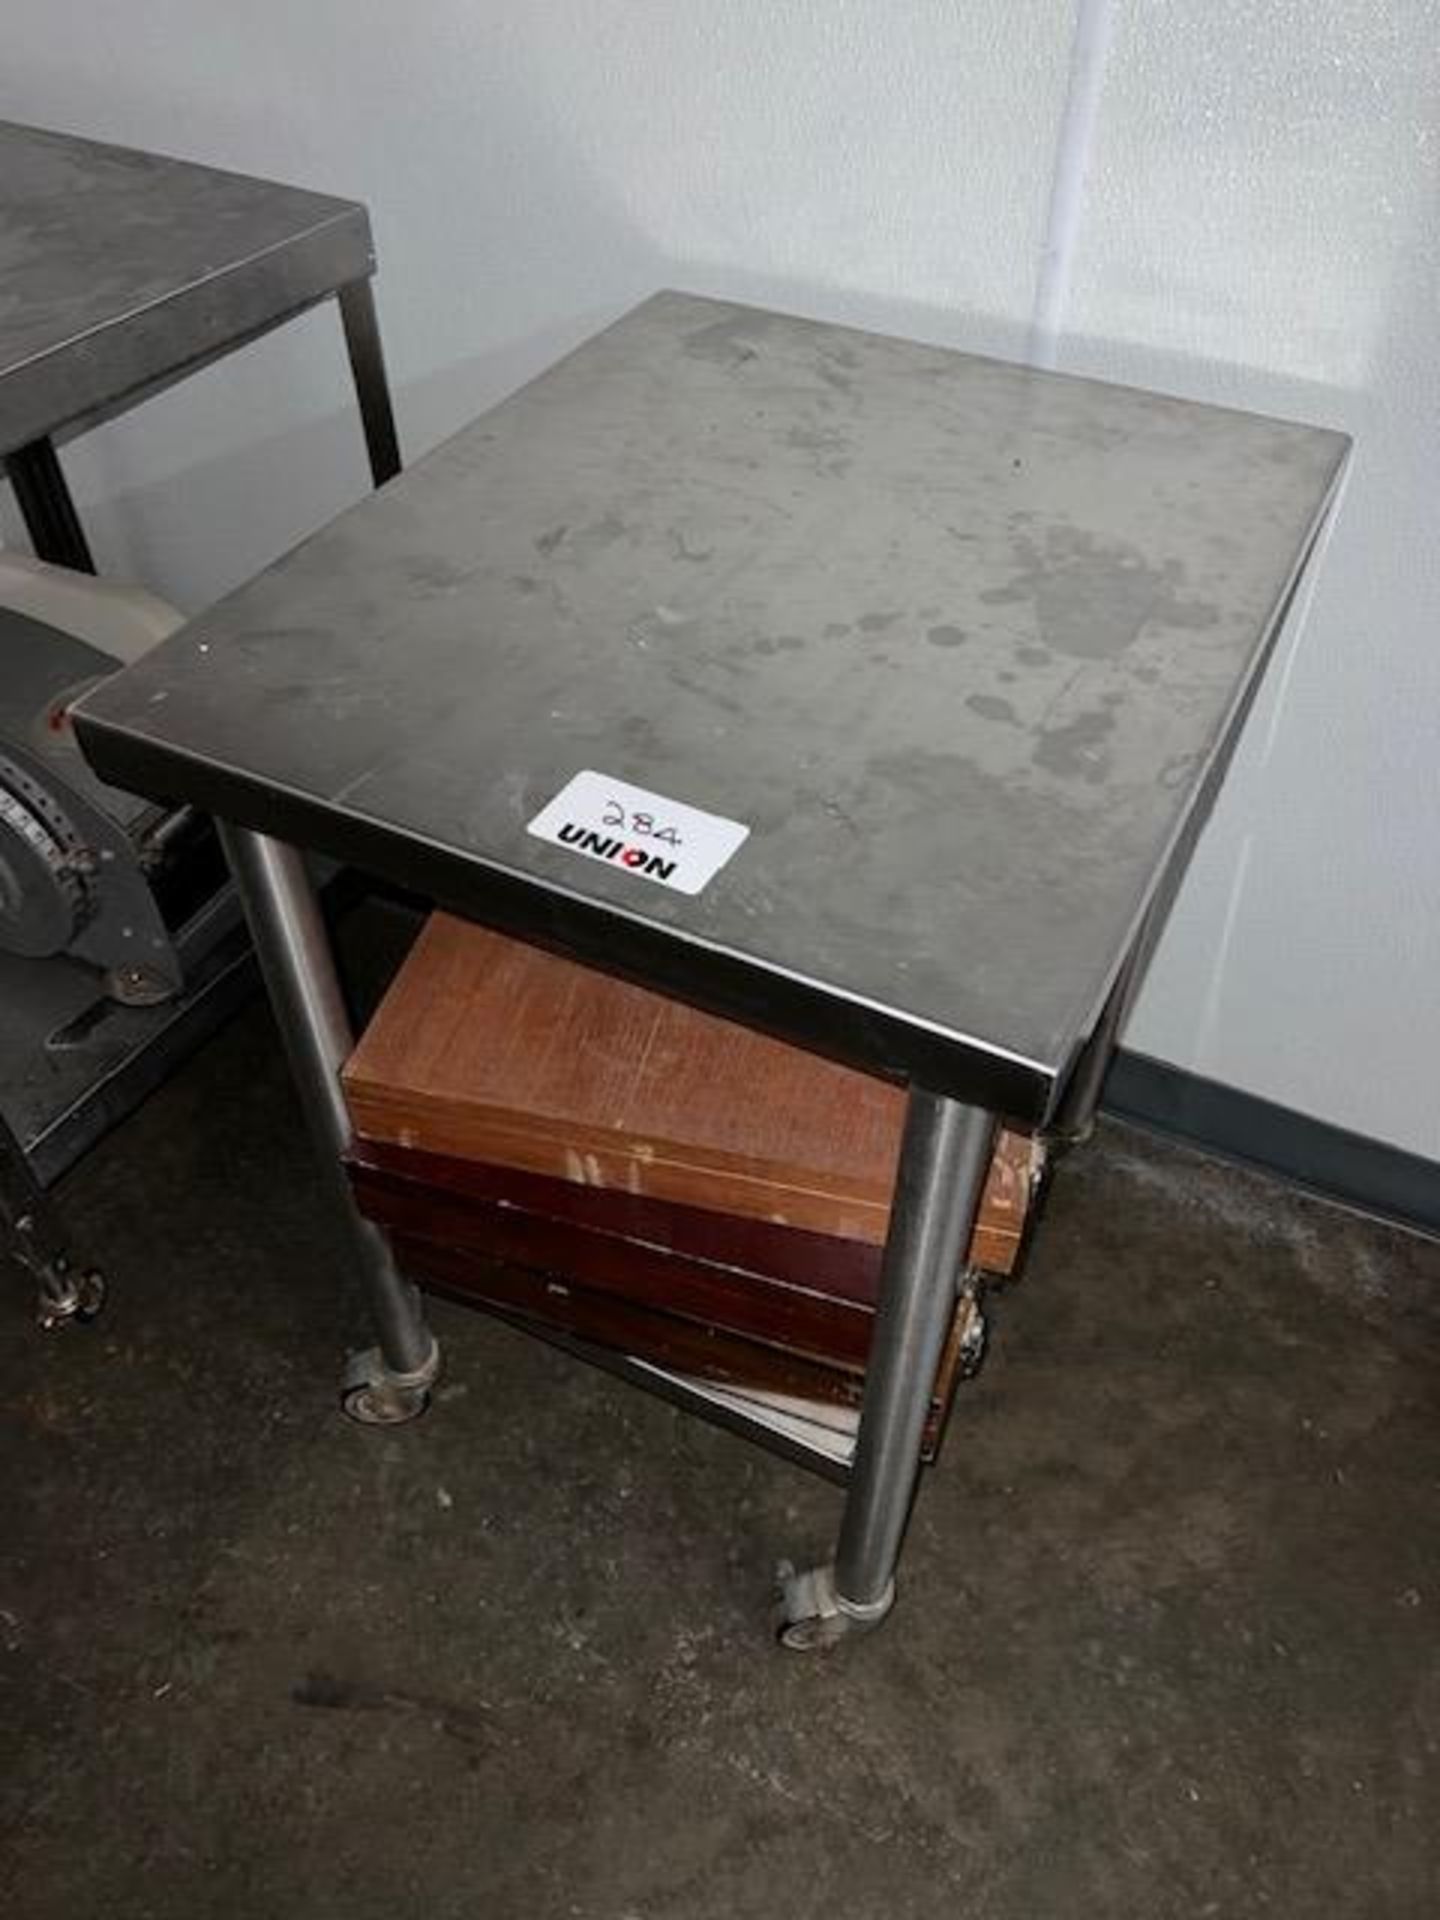 Asset 284 - 20" x 24" stainless steel table without contents. $345.00 Rigged and packed on 48" x 40"